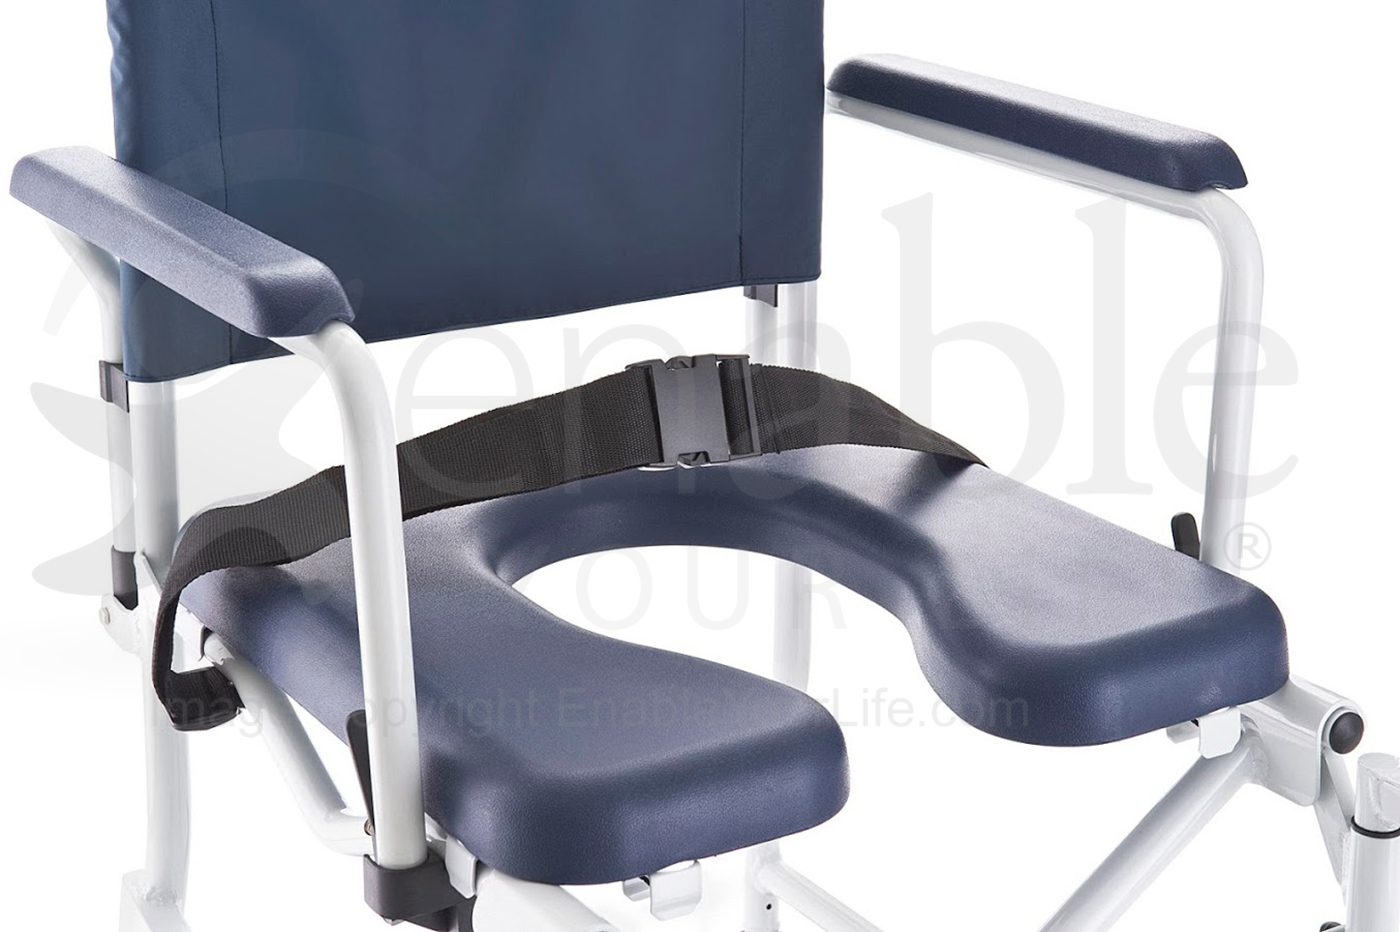 https://enableyourlife.com/images/products/invacare_mariner/6891_seat_close-up_LARGE.jpg